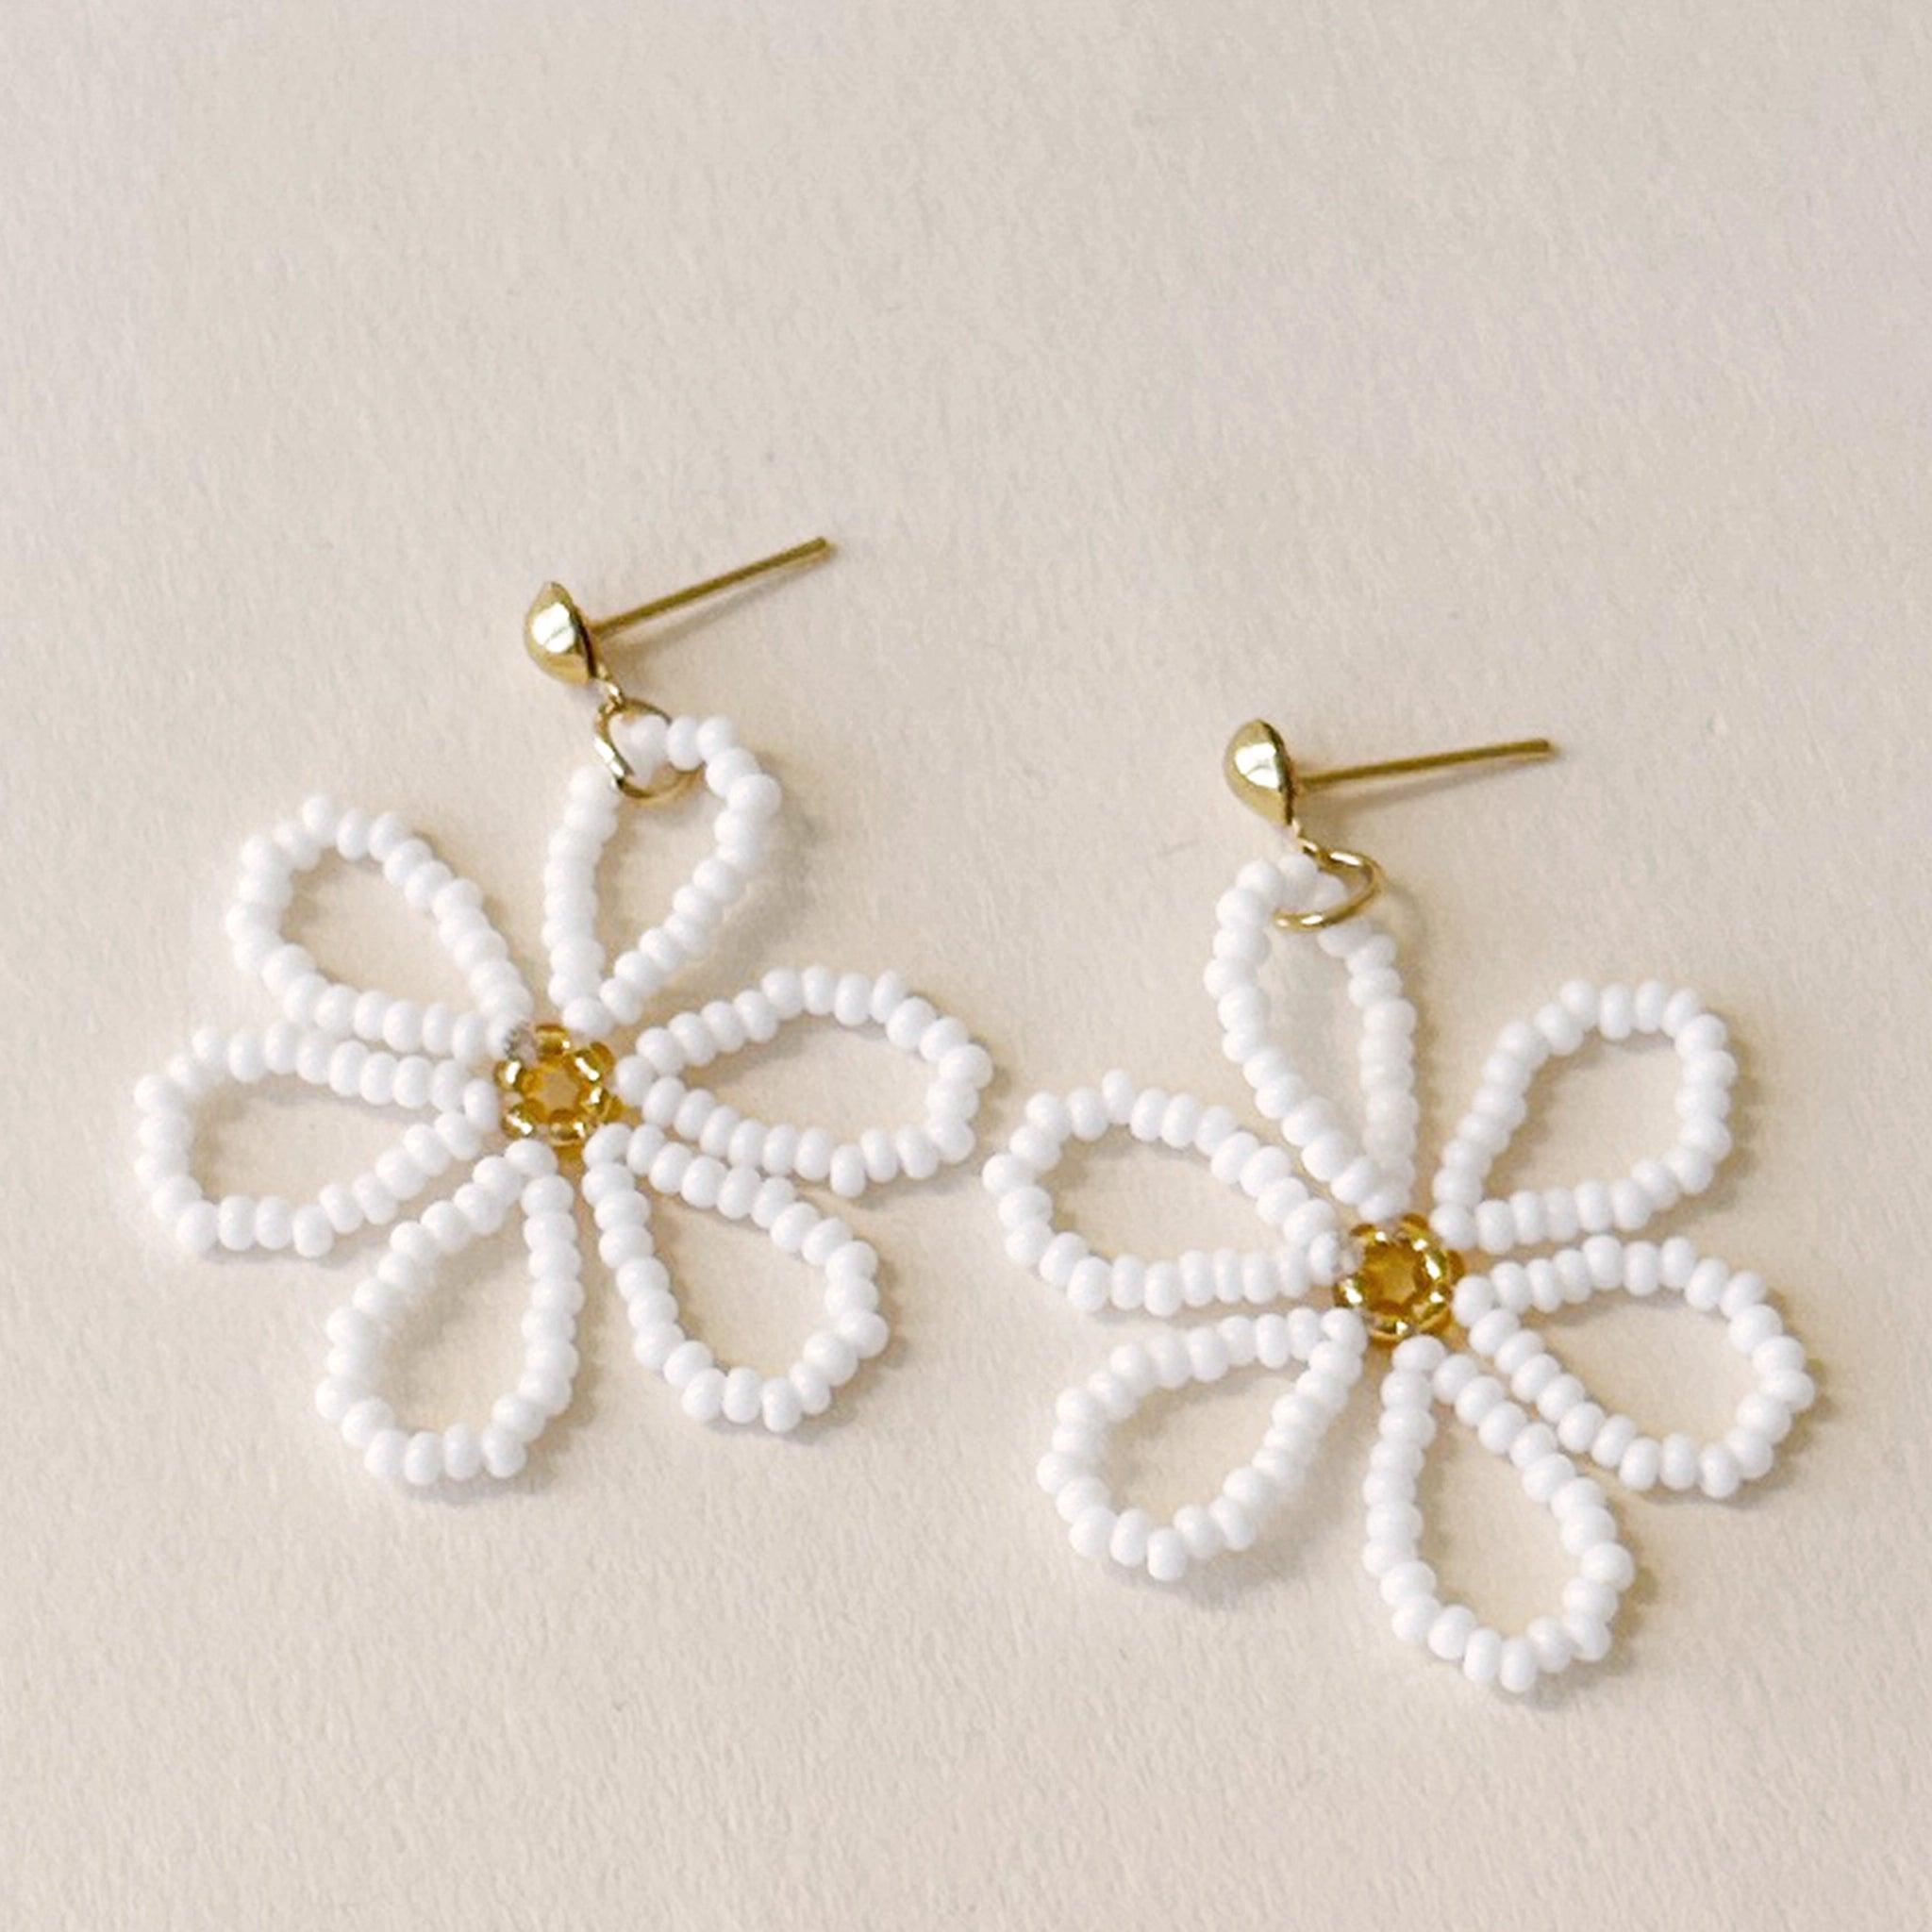 Gold earrings with a white beaded flower dangling from it with a gold beaded center.